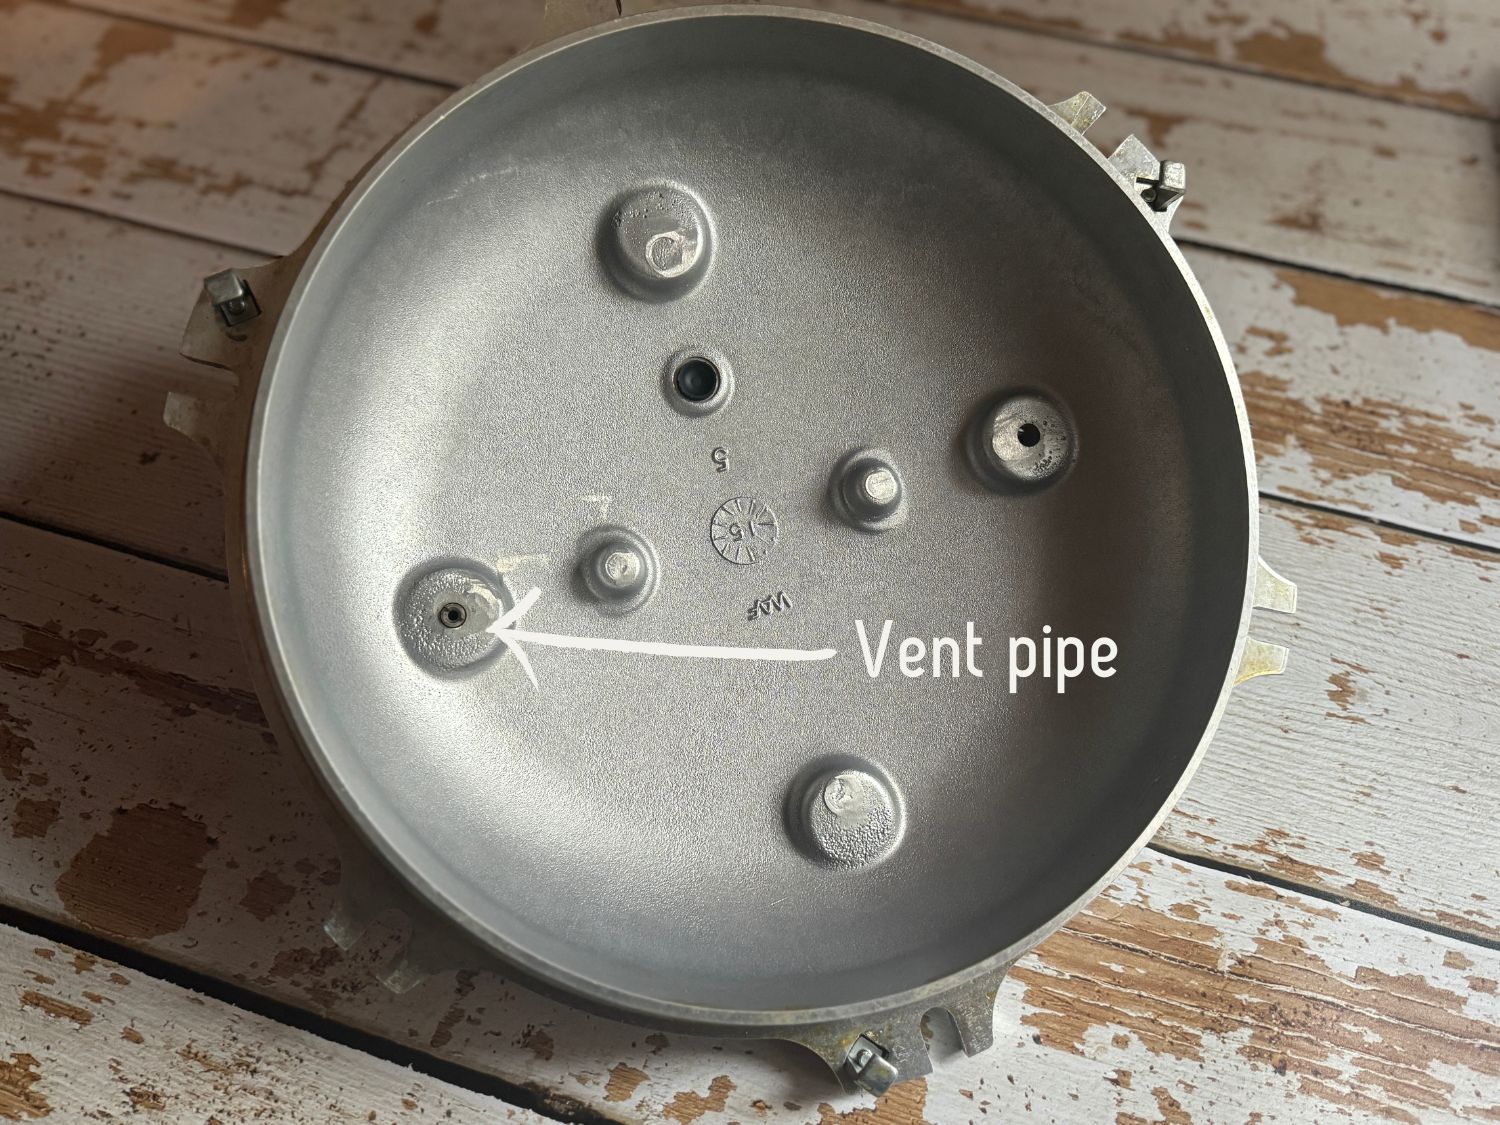 A photo pointing out where the vent pipe is on the pressure canner cover